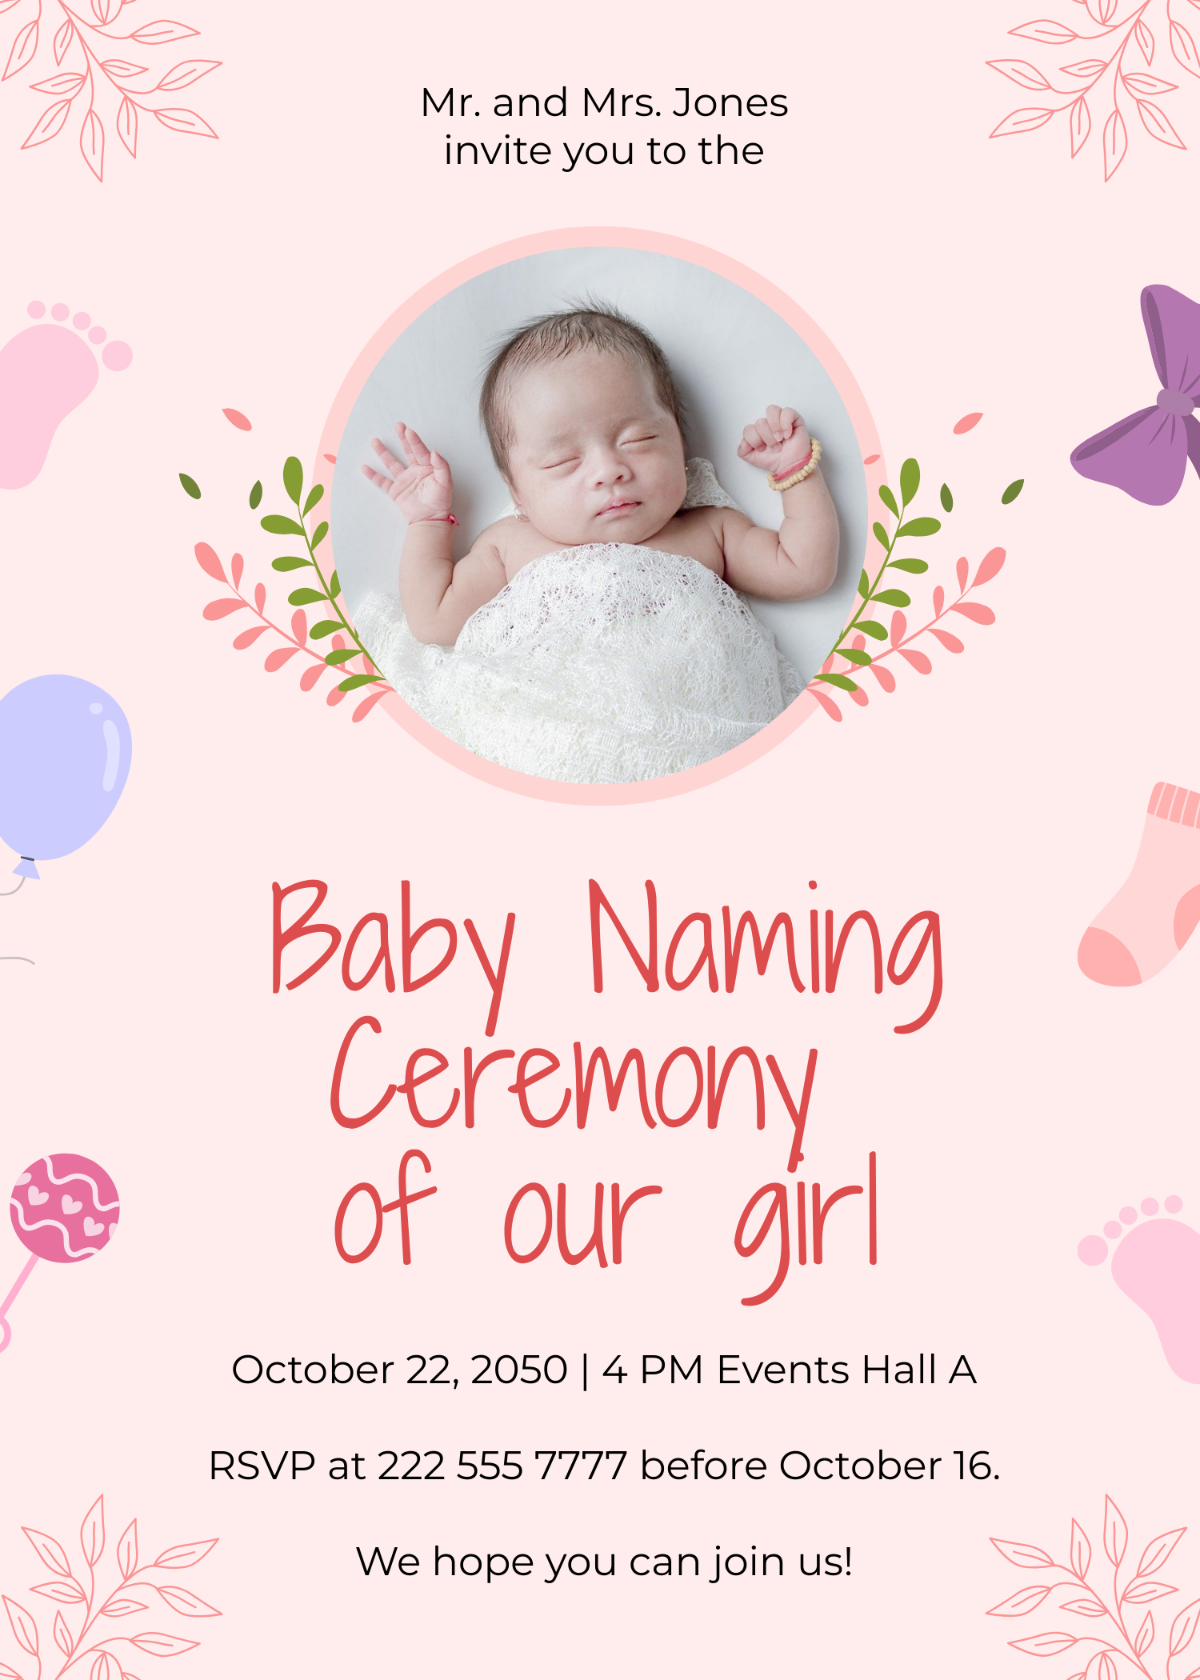 Free Naming Ceremony Invitation Card With Baby Photo